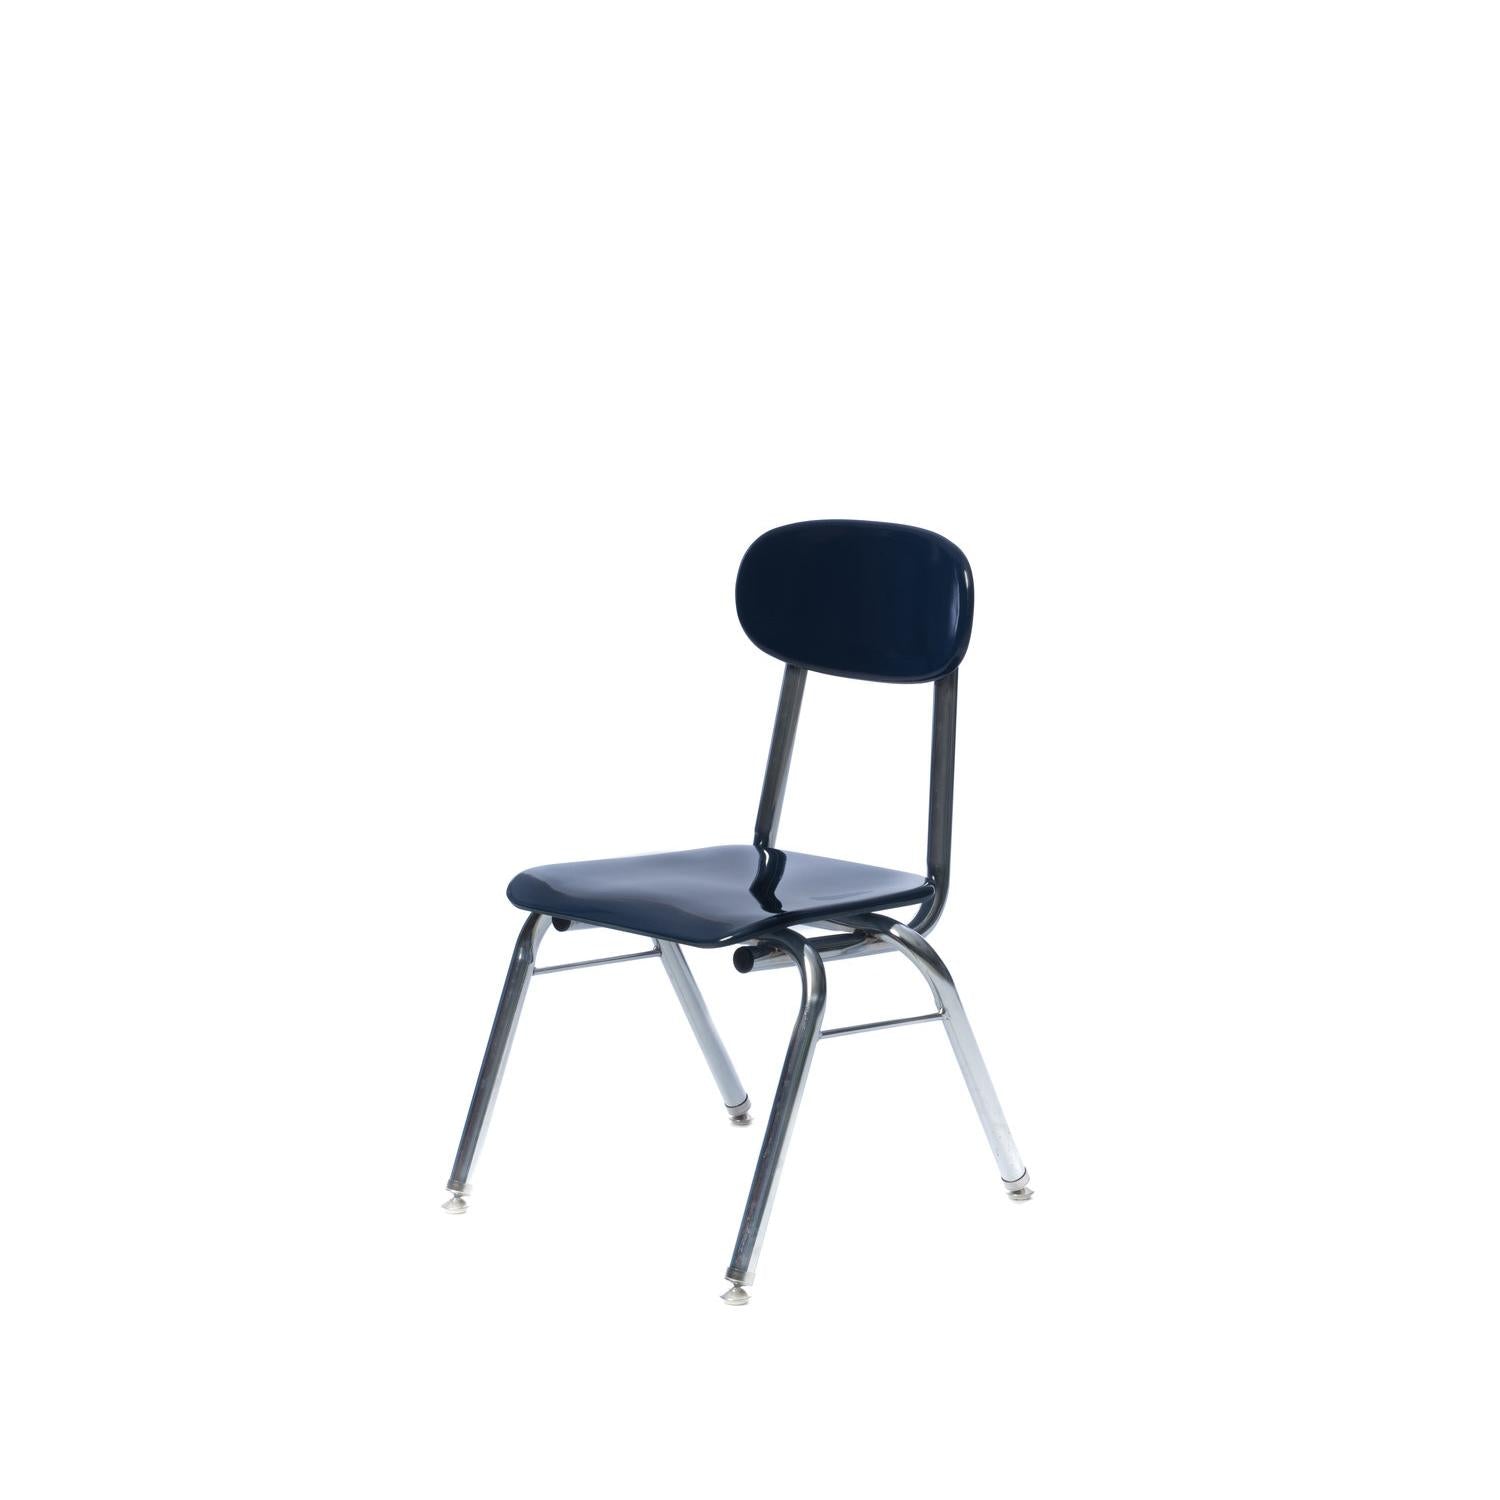 5/8" Solid Plastic V-Leg Stacking School Chair, 13-1/2" Seat Height